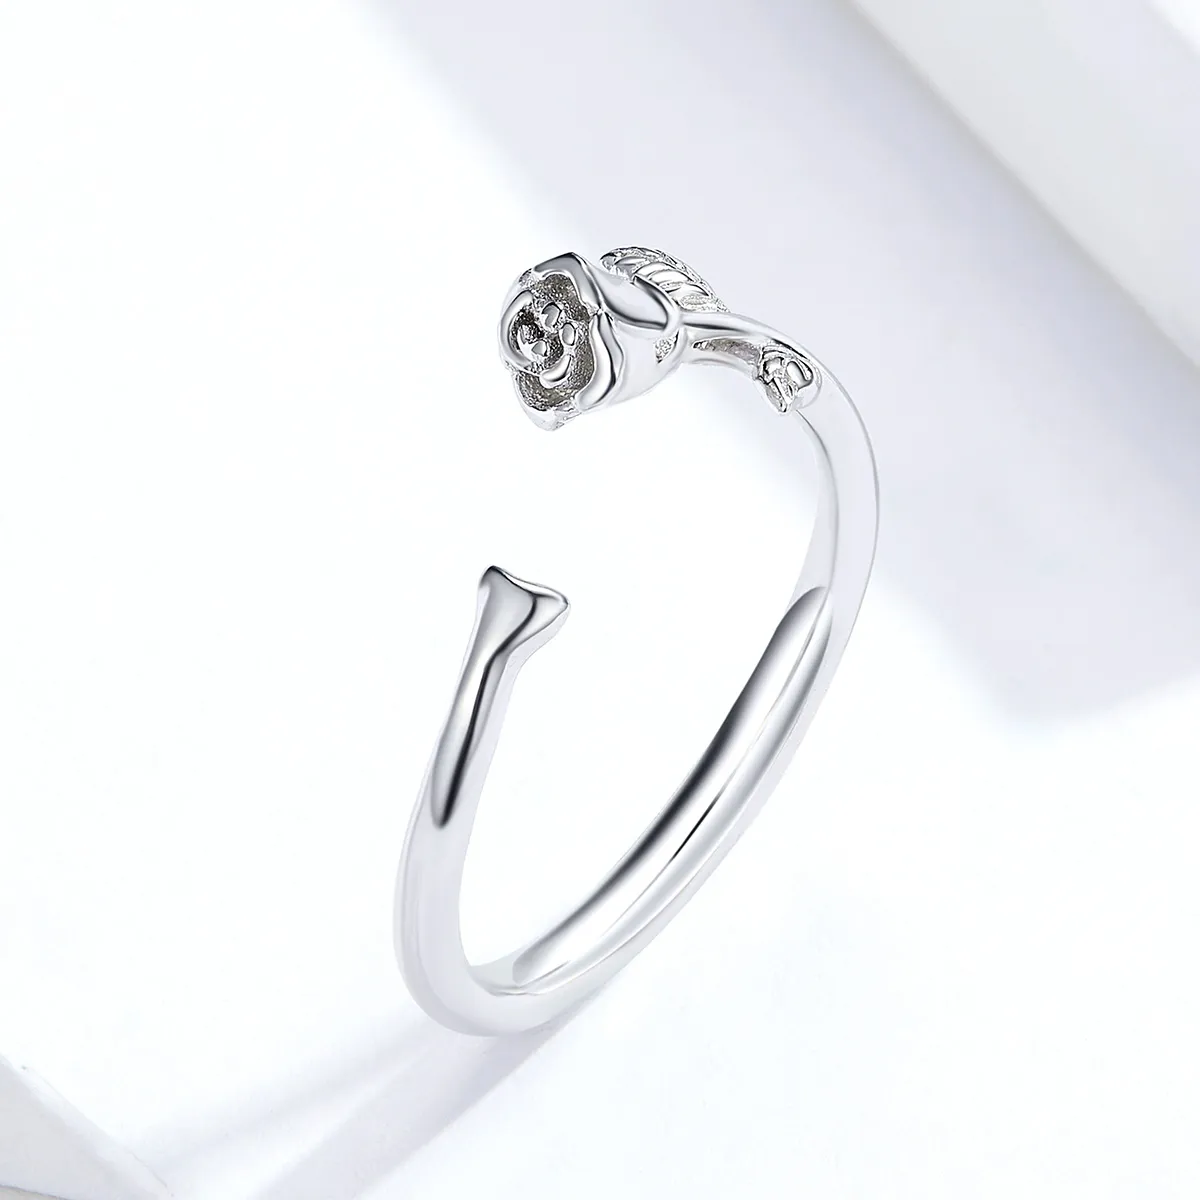 Pandora Style Silver Rose Flower Open Ring - BSR065